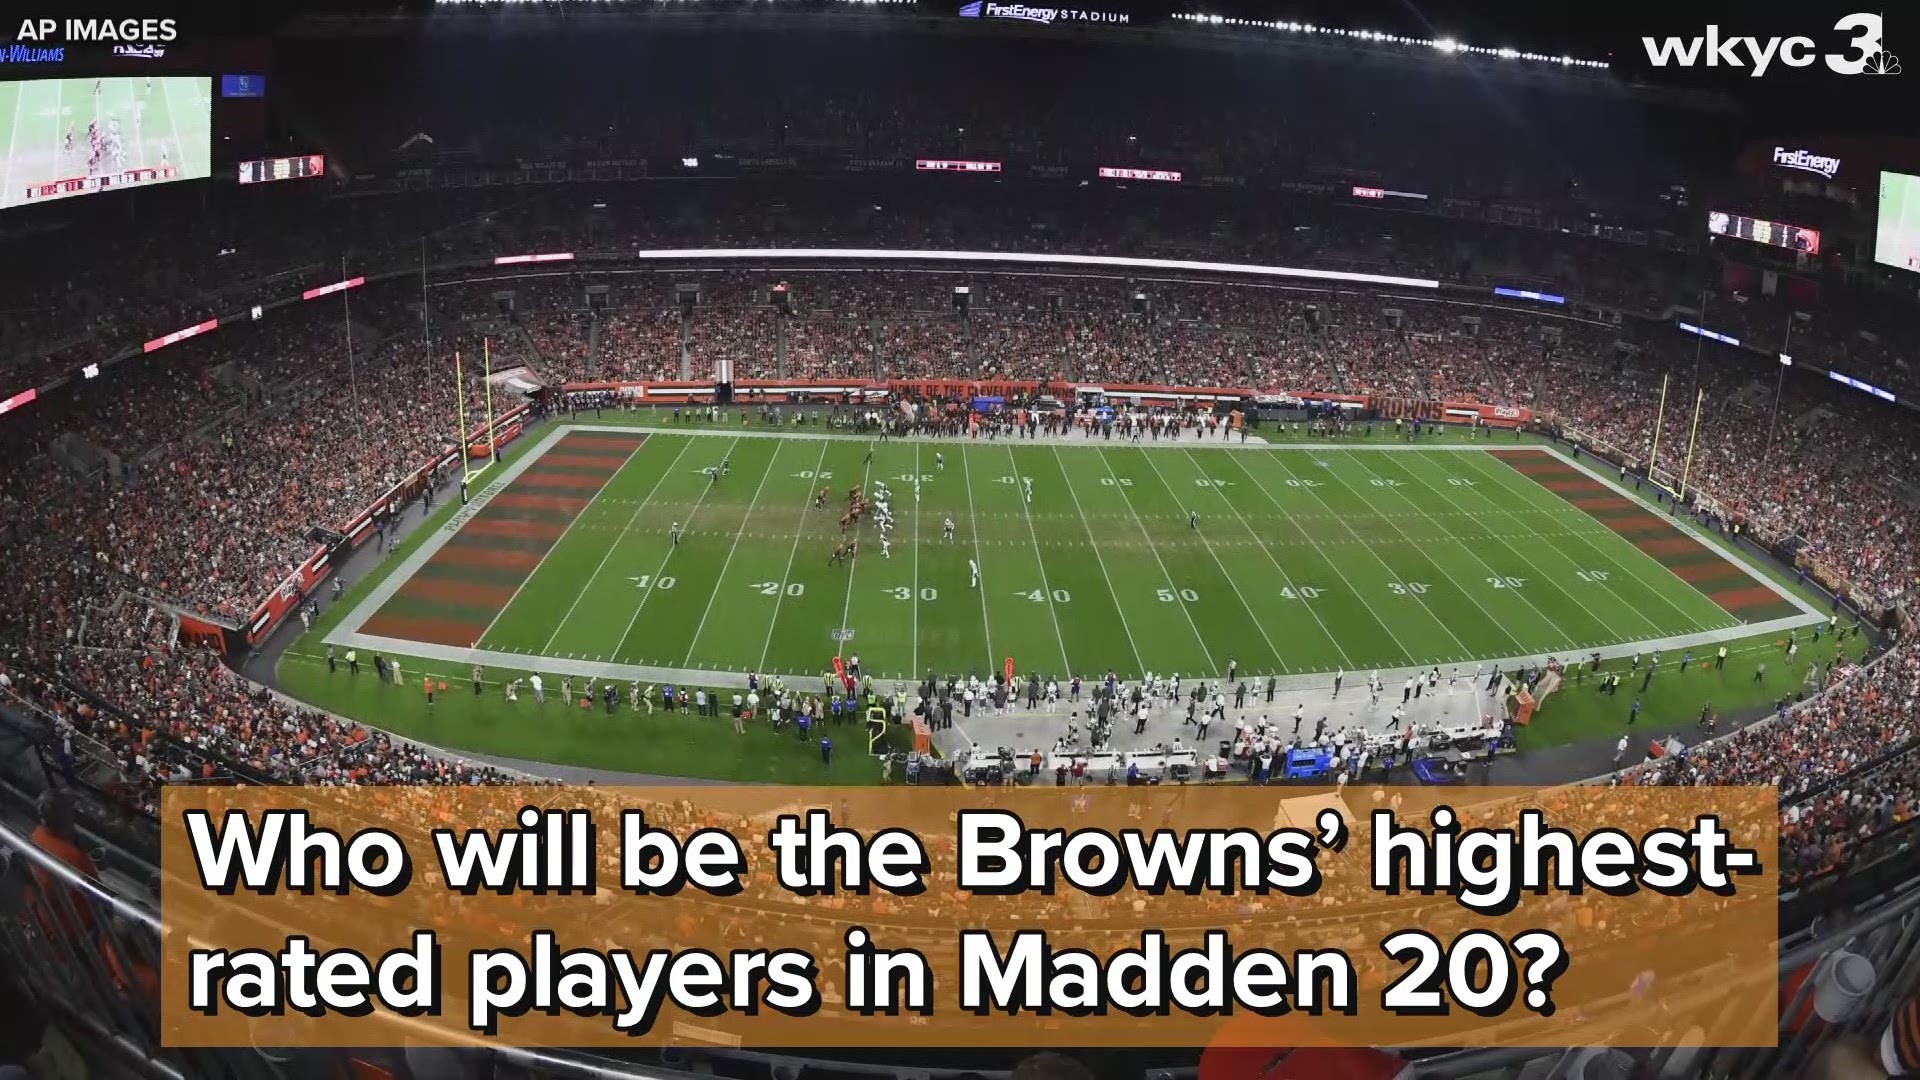 Wide receiver Odell Beckham Jr., defensive end Myles Garrett and quarterback Baker Mayfield figure to be the Cleveland Browns' highest-rated players in Madden 20.